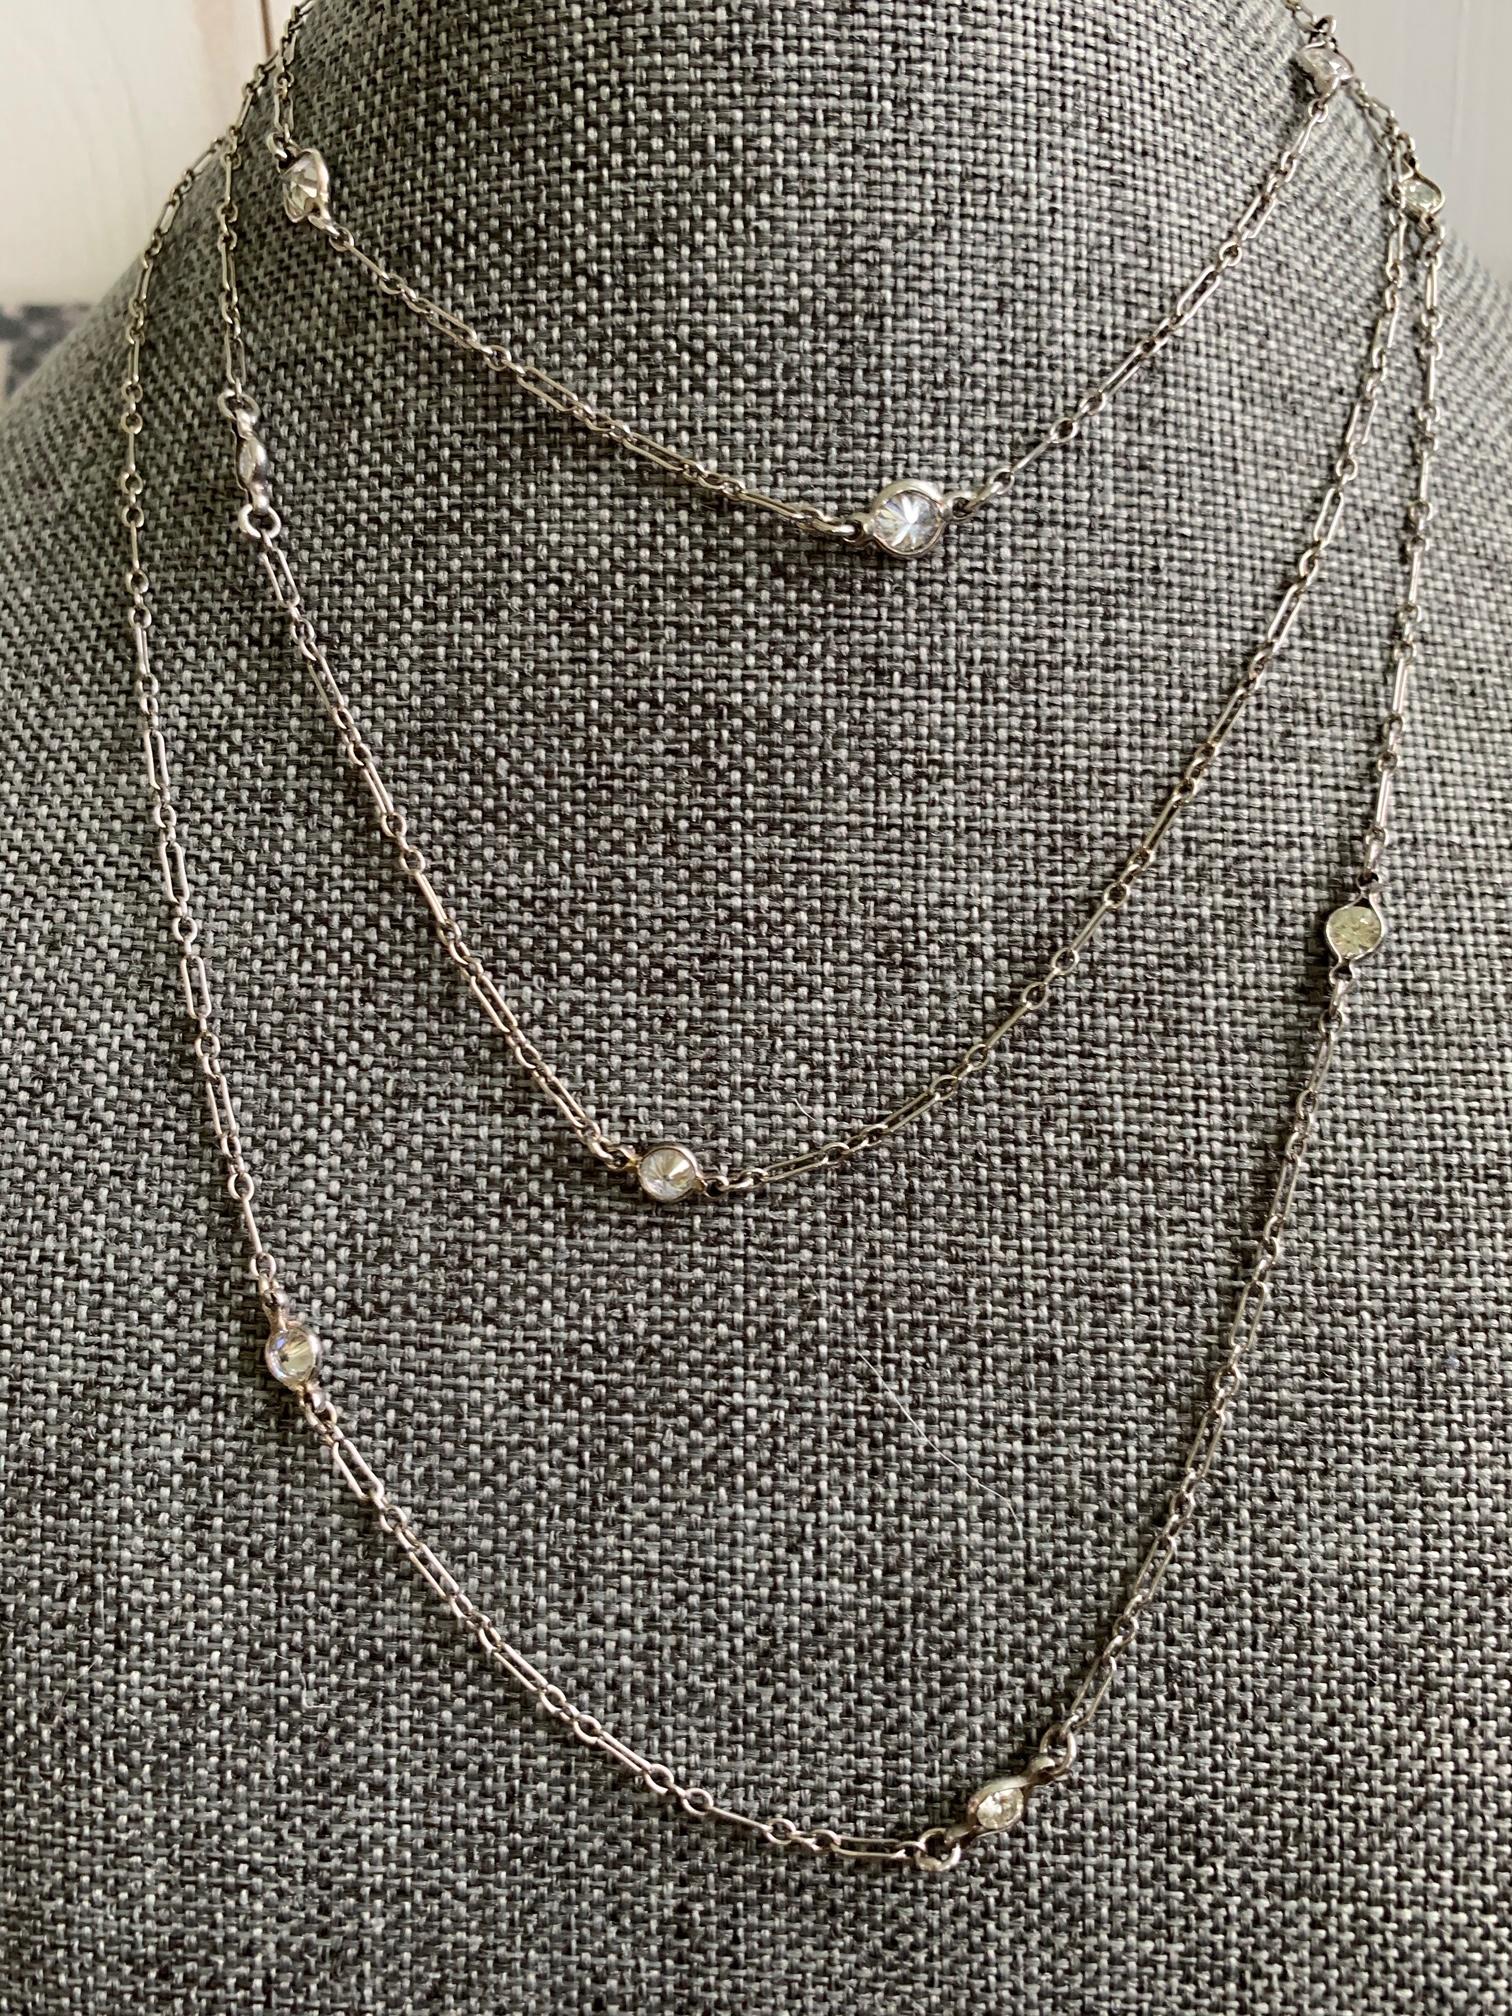 This necklace design only gets better with age; in other words, it's ageless!  This beautiful, sleek, long and 14k white gold has 13 diamonds, graduated in weight and size, dotted throughout the length of the chain.  

The 13 brilliant cut diamonds